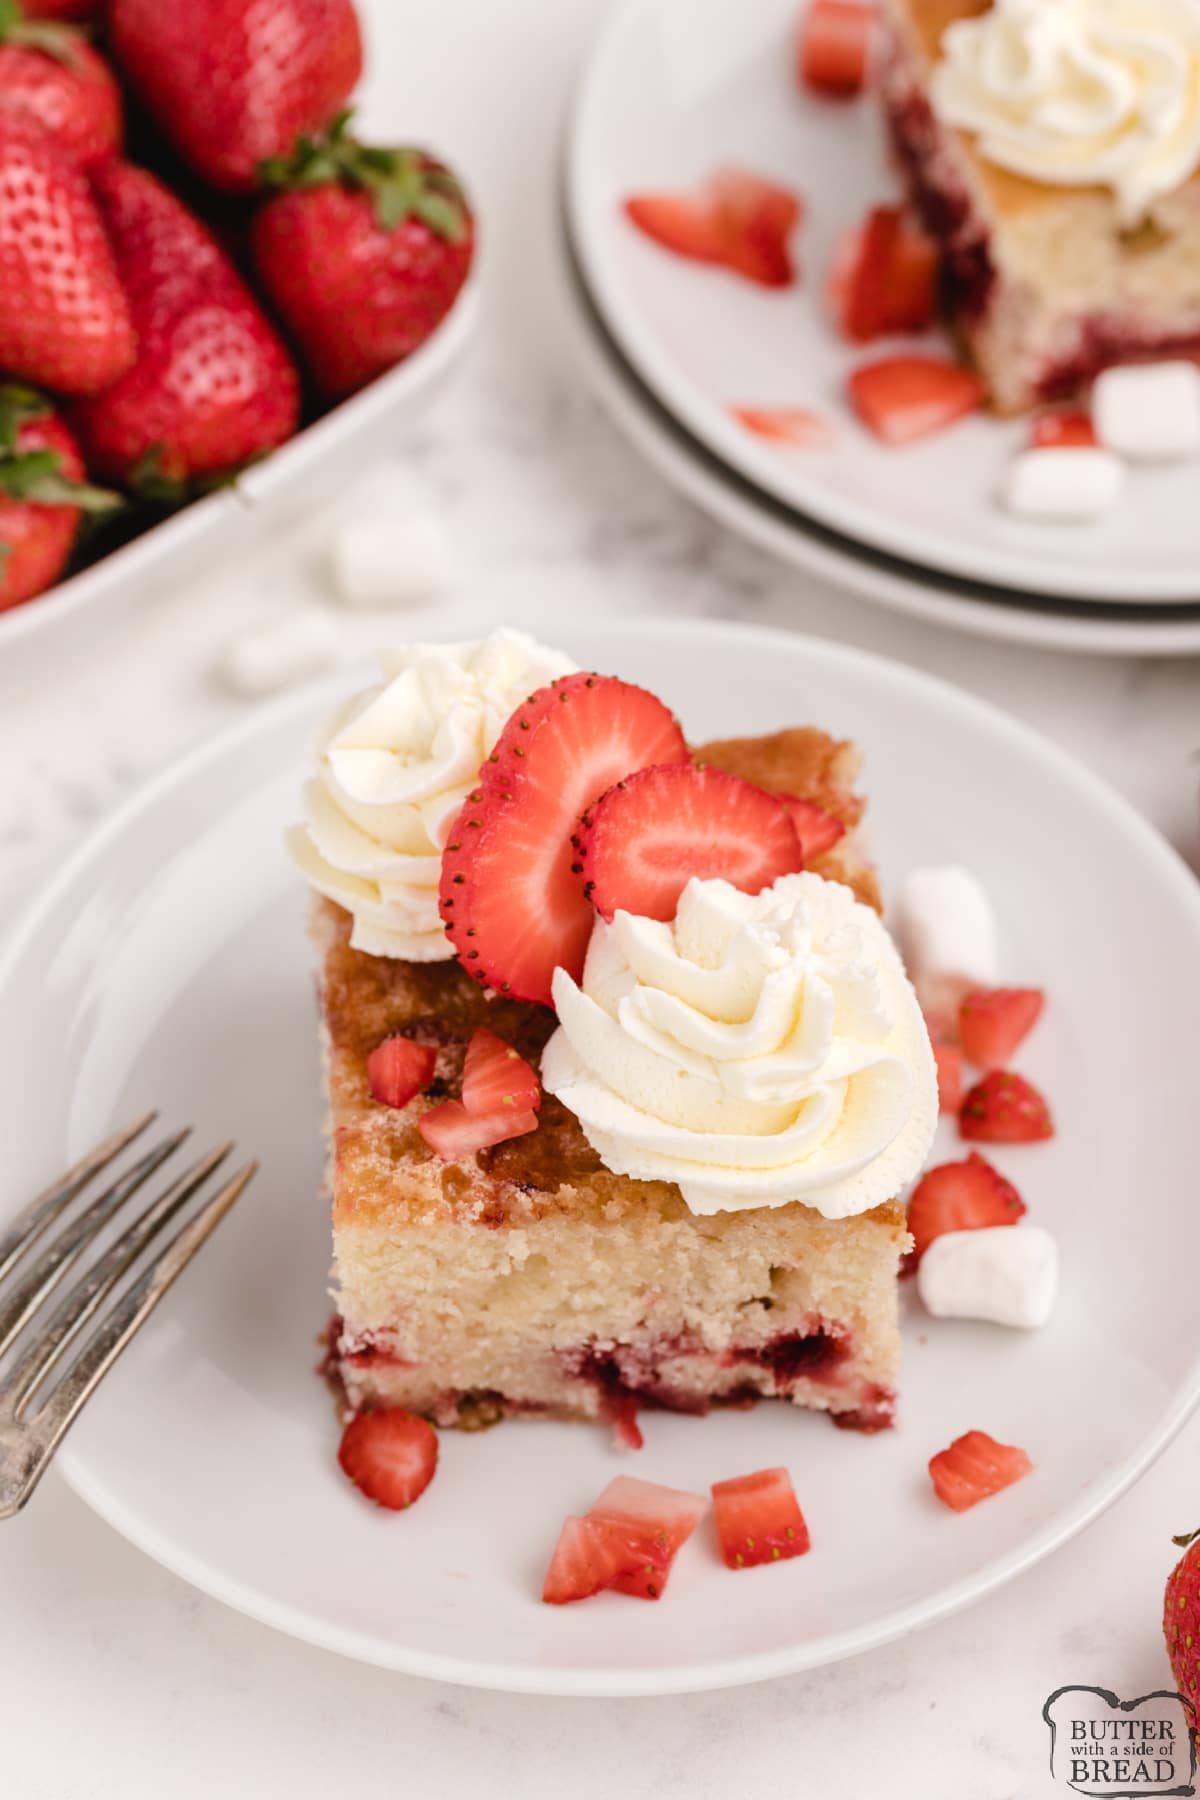 Homemade shortcake recipe baked with strawberries and marshmallows